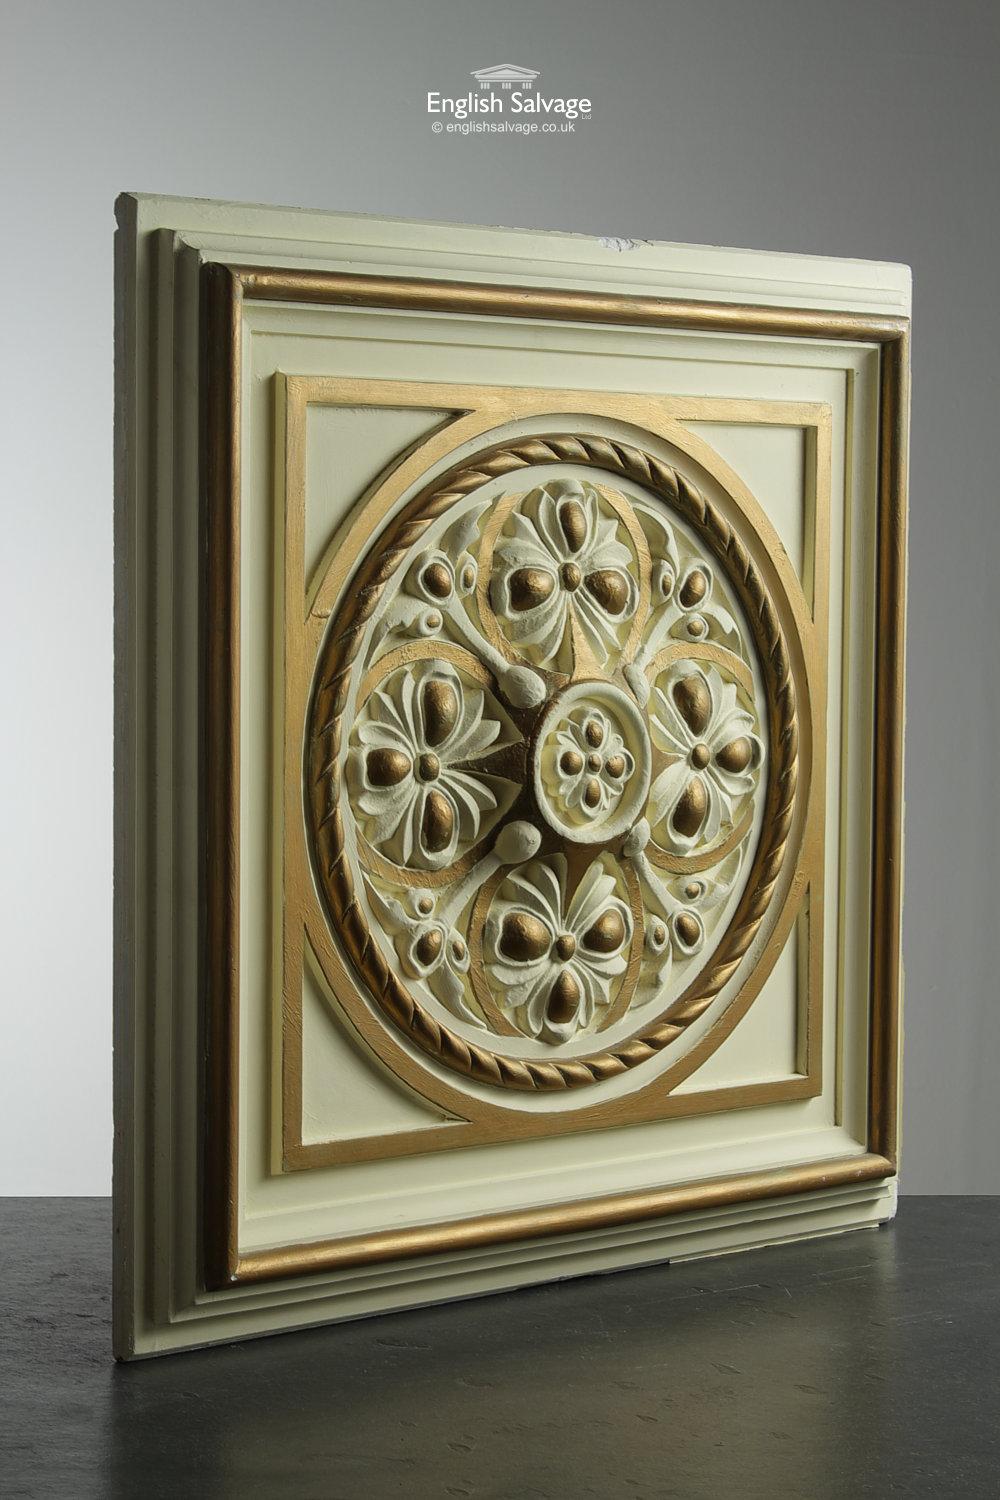 Reclaimed large decorative plaster ceiling tiles / panels. The cream colored tiles feature repeated quatrefoil relief moulding with a circular rope frame and gilt highlights. As shown in the composite example image, these add an element of grandeur